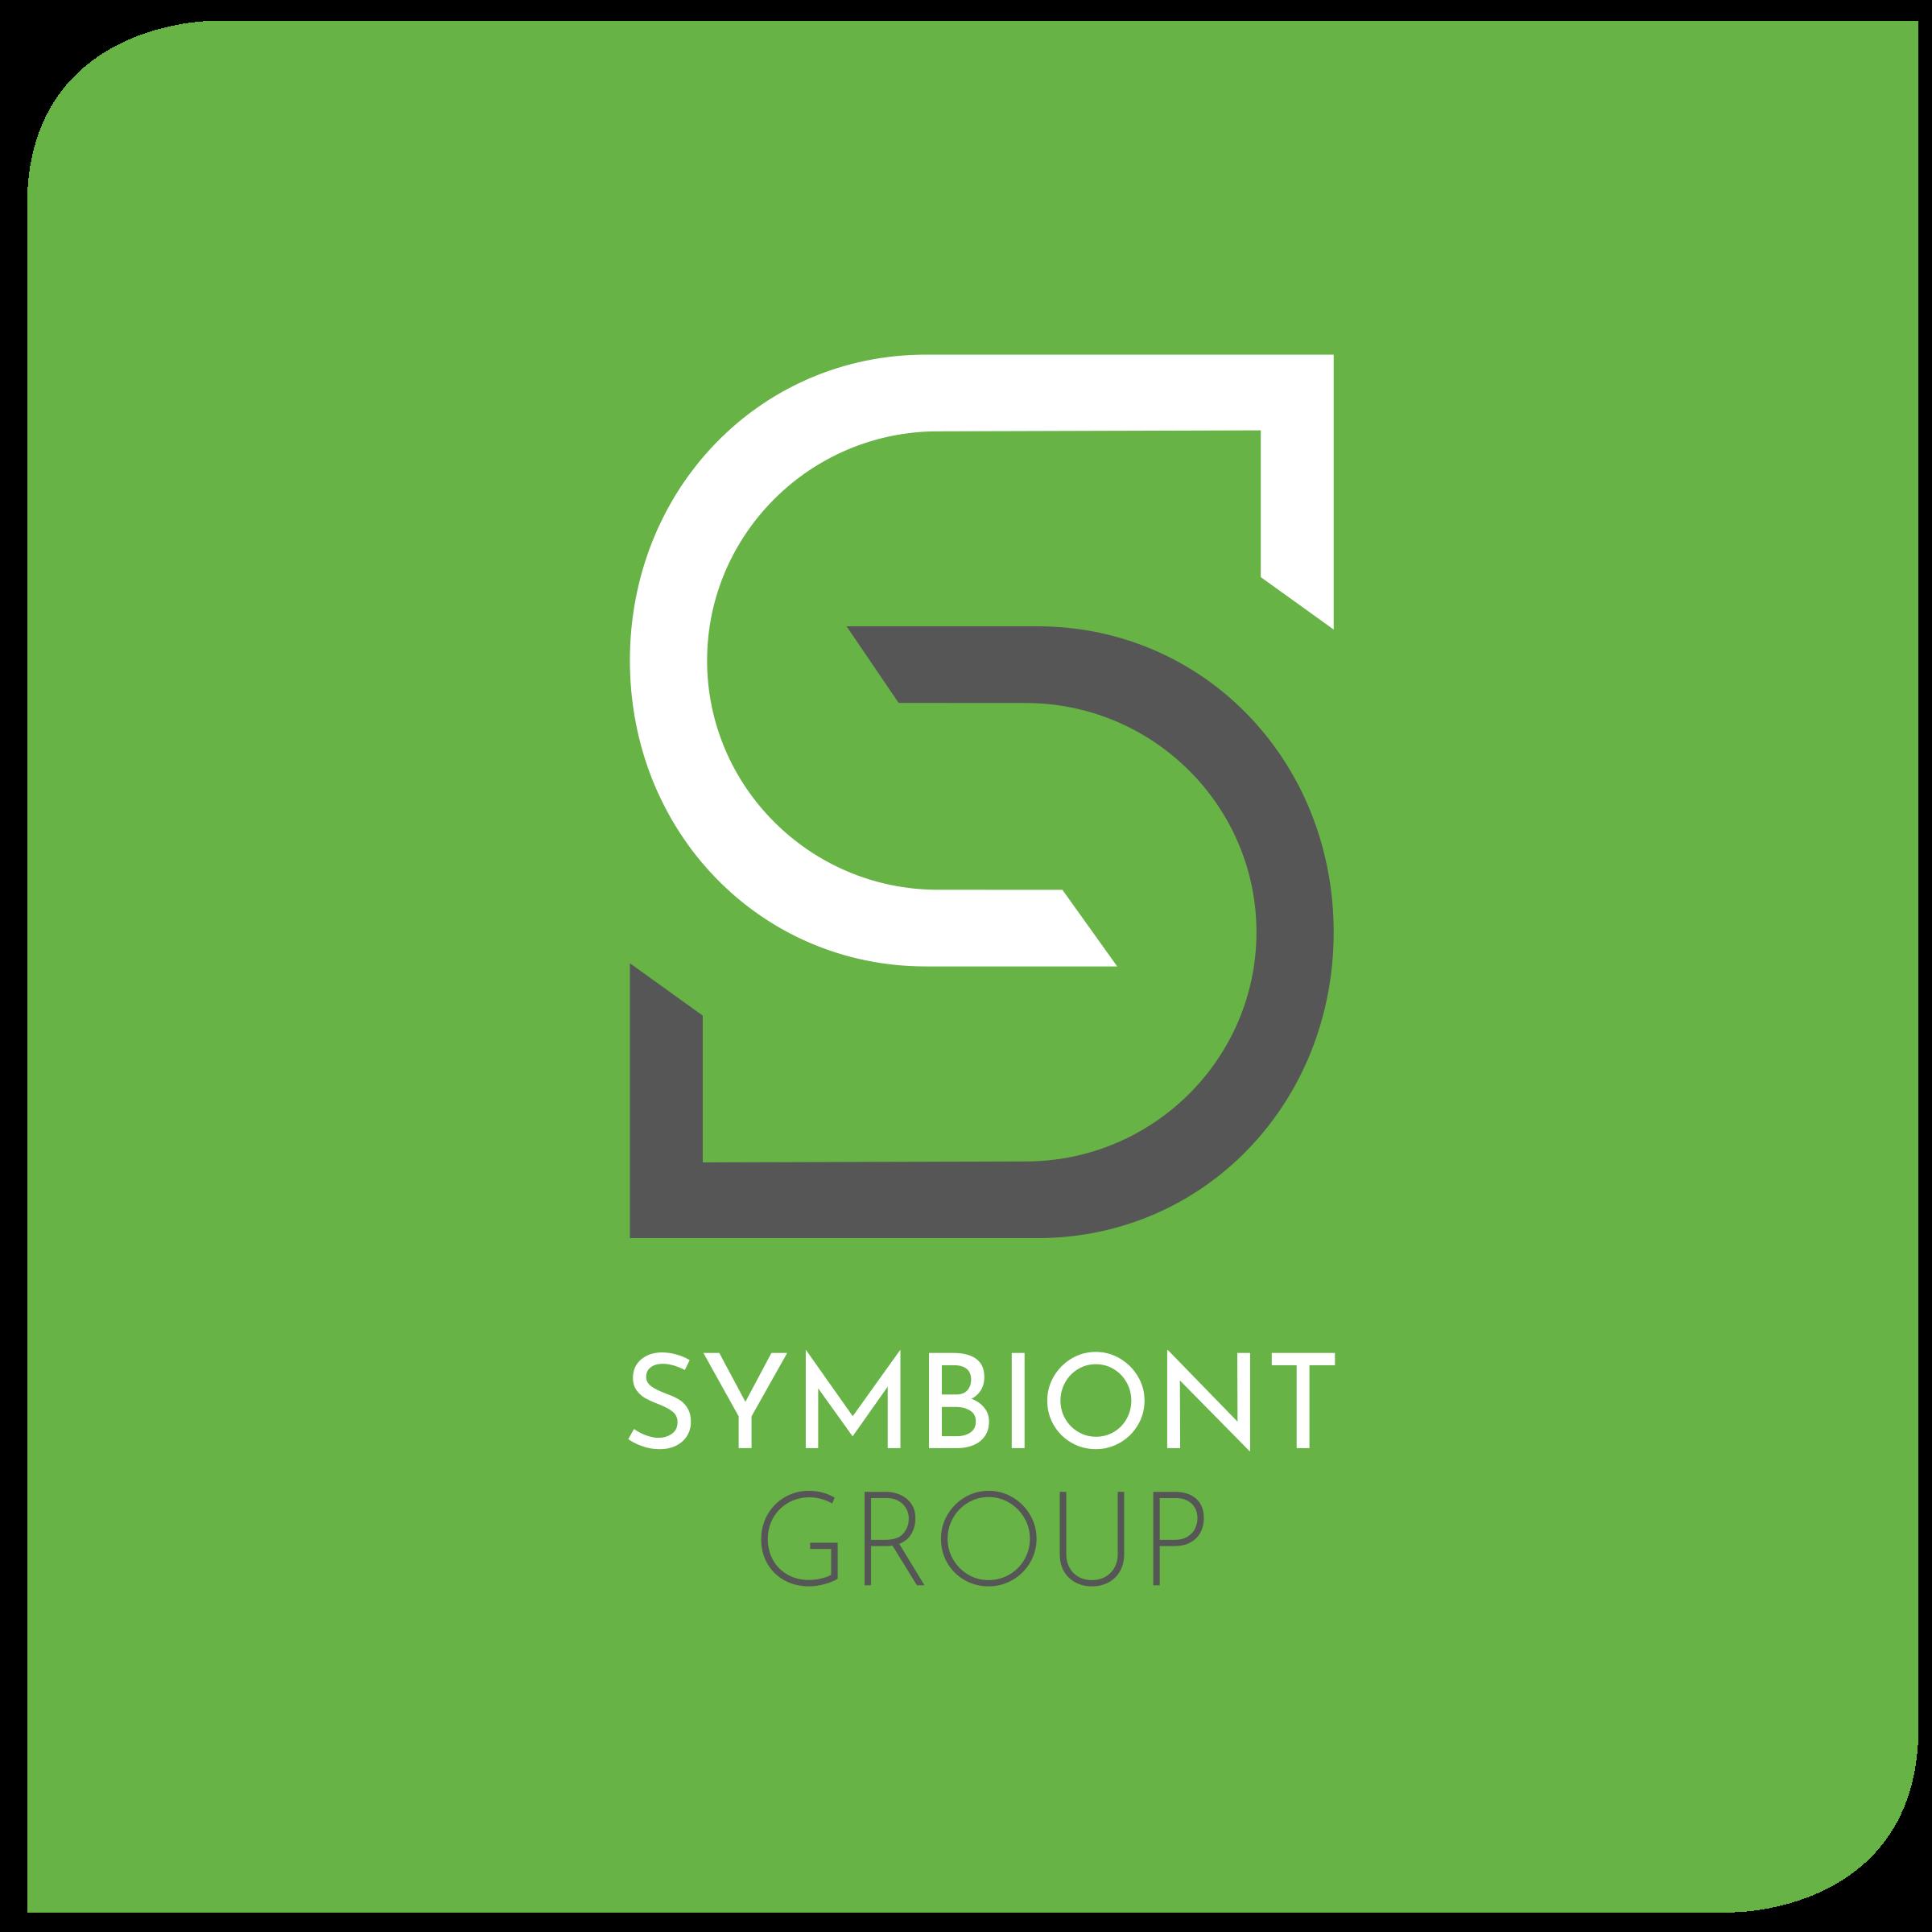 Symbiont Group